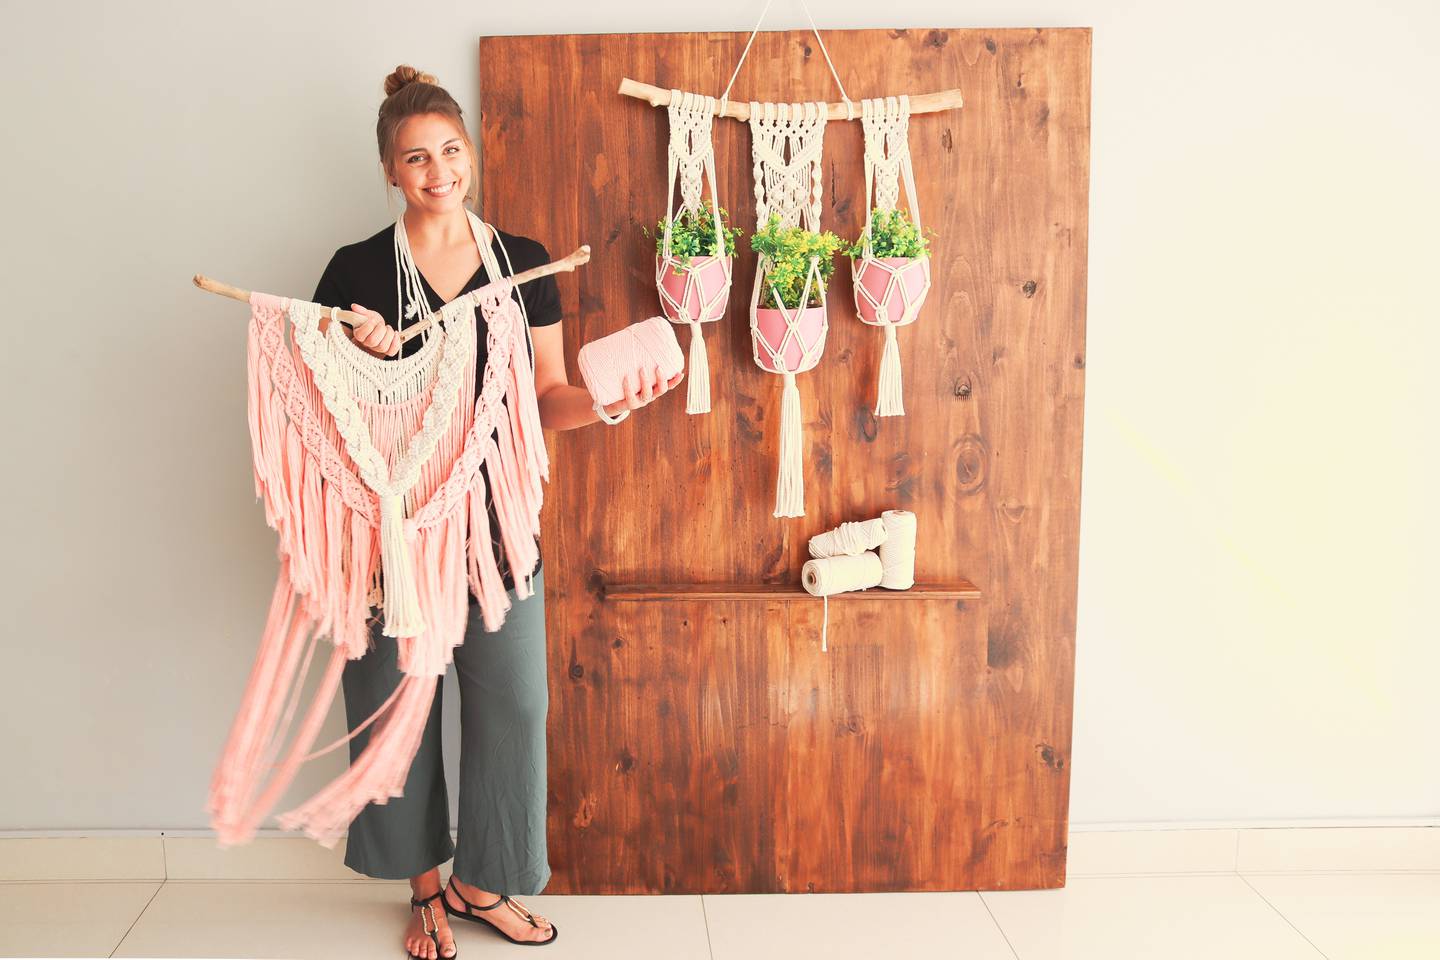 Former Emirates business class crew Anicia Van Zyl’s lockdown hobby at her home in Dubai’s Motor City became such a passion she progressed to create Living Space by Anna to market her output. Courtesy: Living Space by Anna